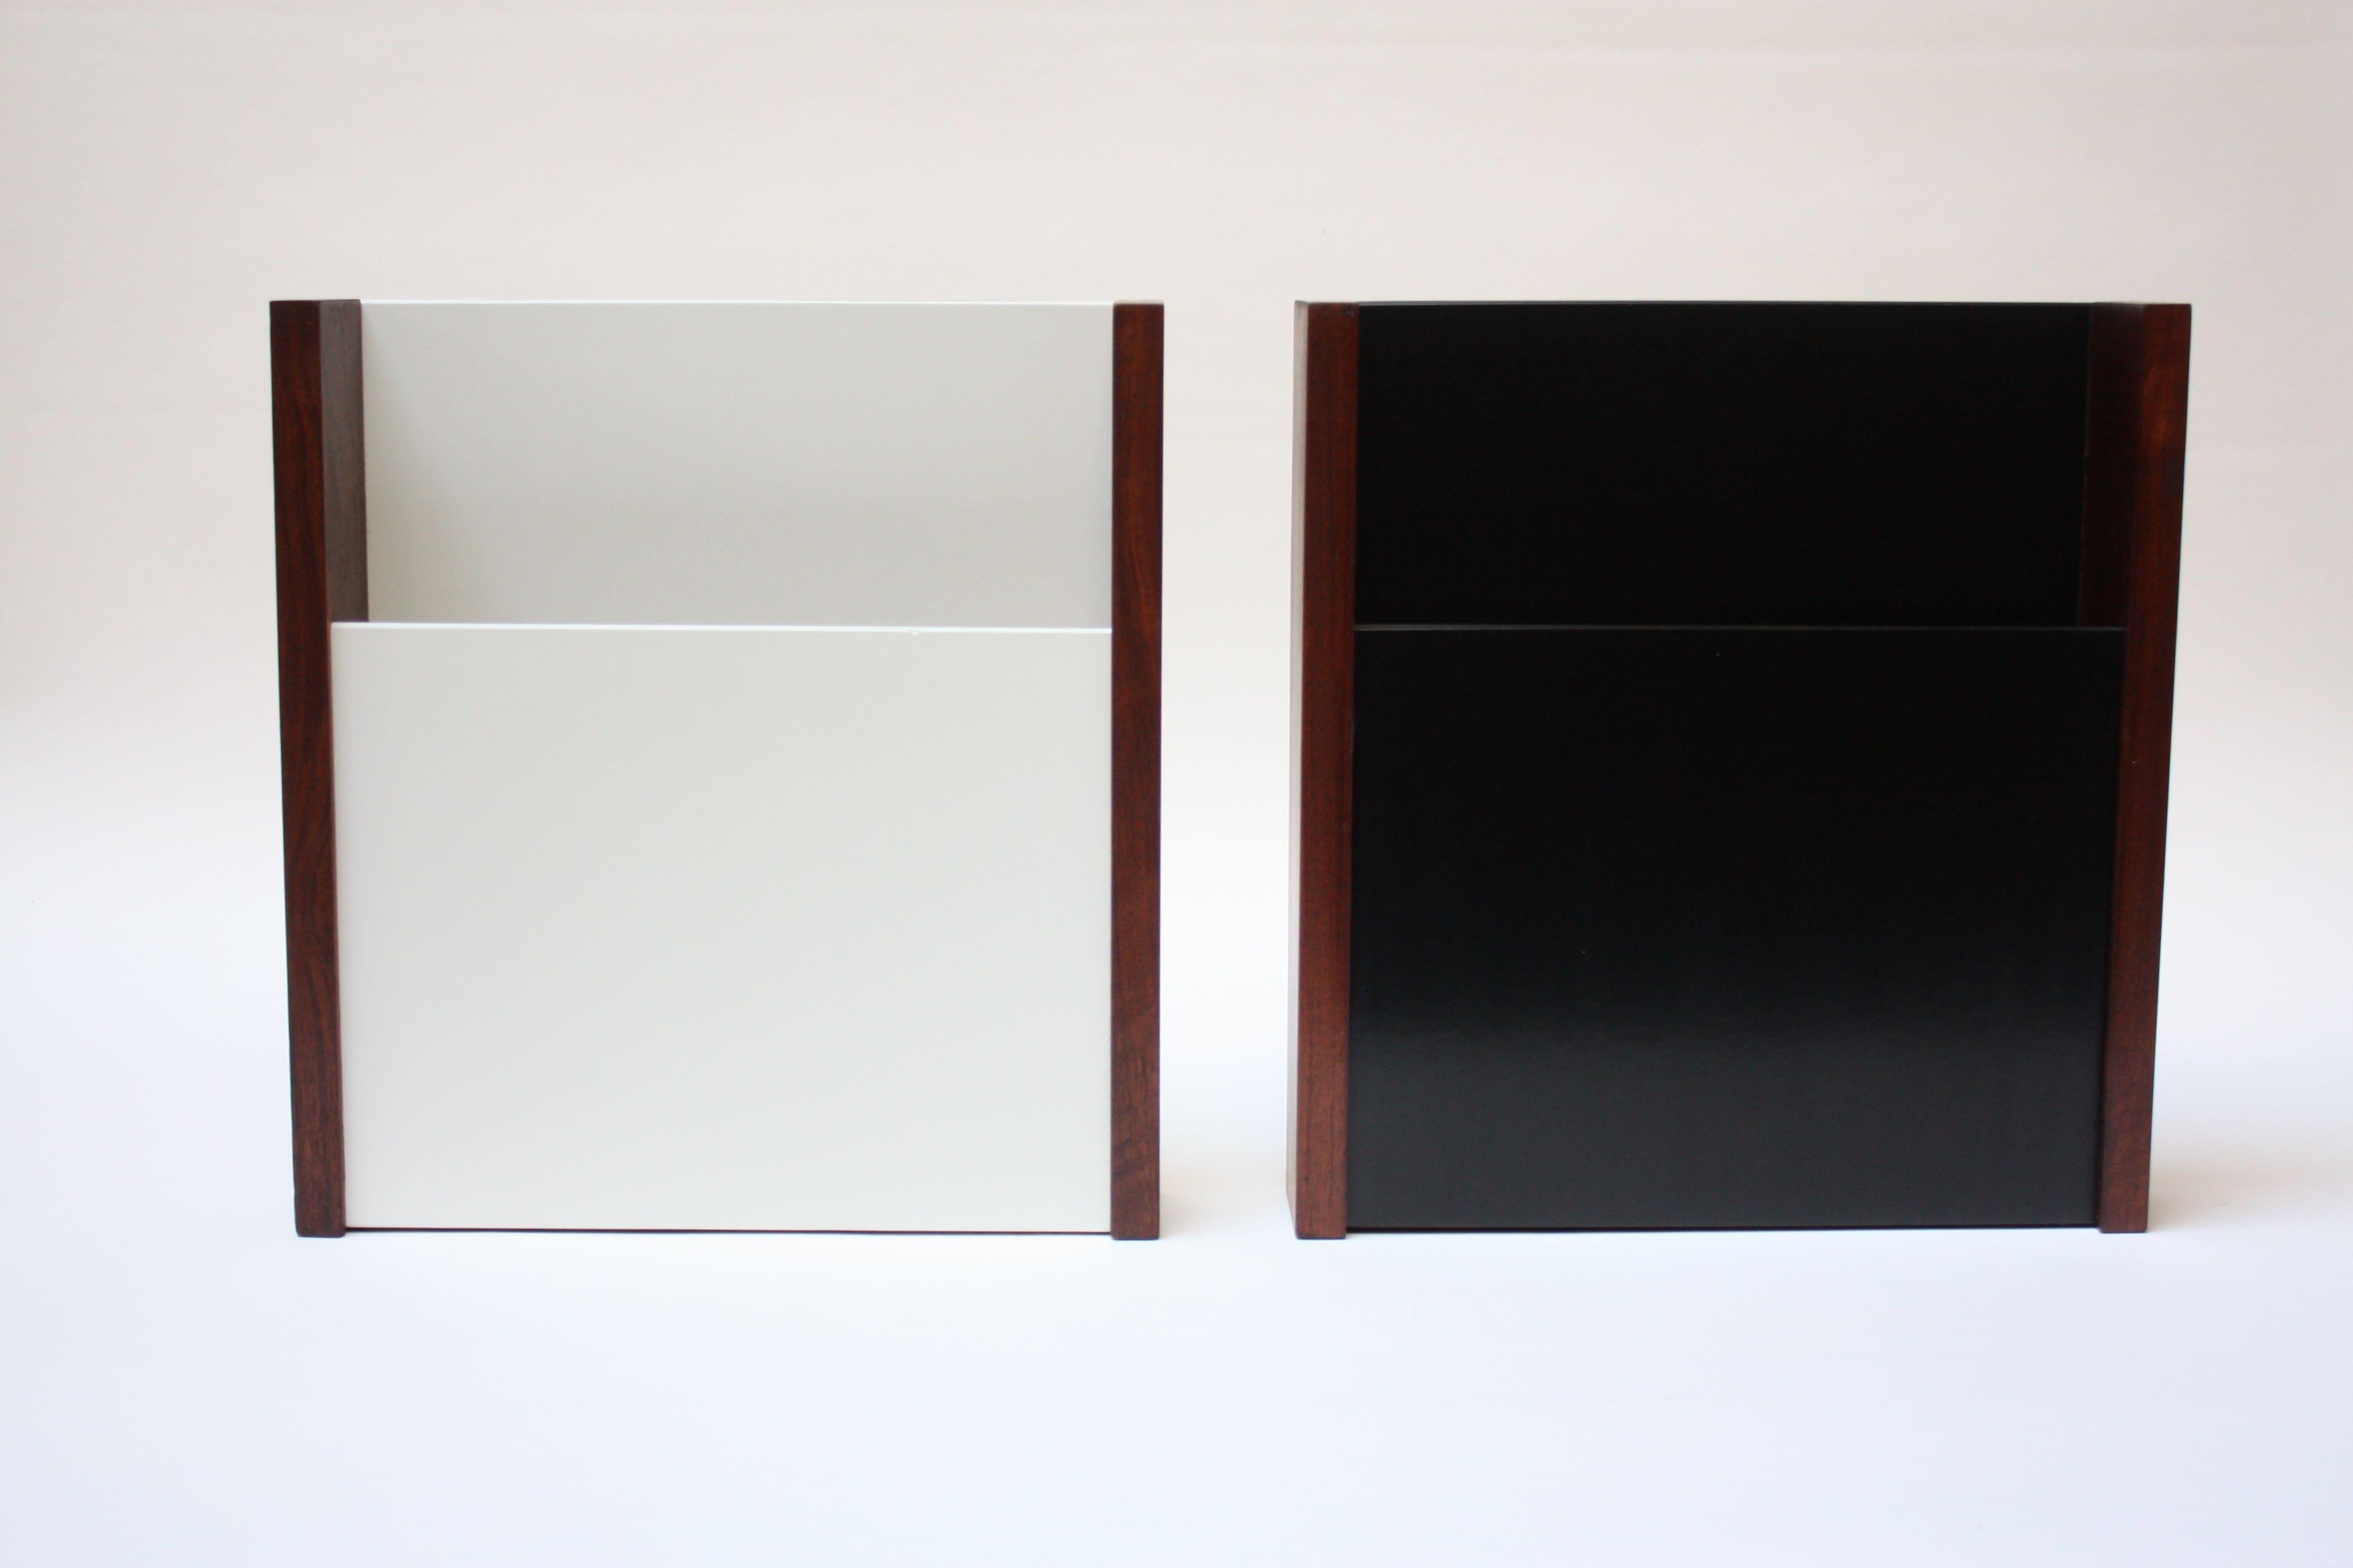 Wall-mounted magazine holders by Peter Pepper Products of Wilmington, CA (circa 1970s). Composed of a laminate divider (one in black, the other in white) framed by walnut borders.
Very nice, vintage condition with minor wear (namely a small edge